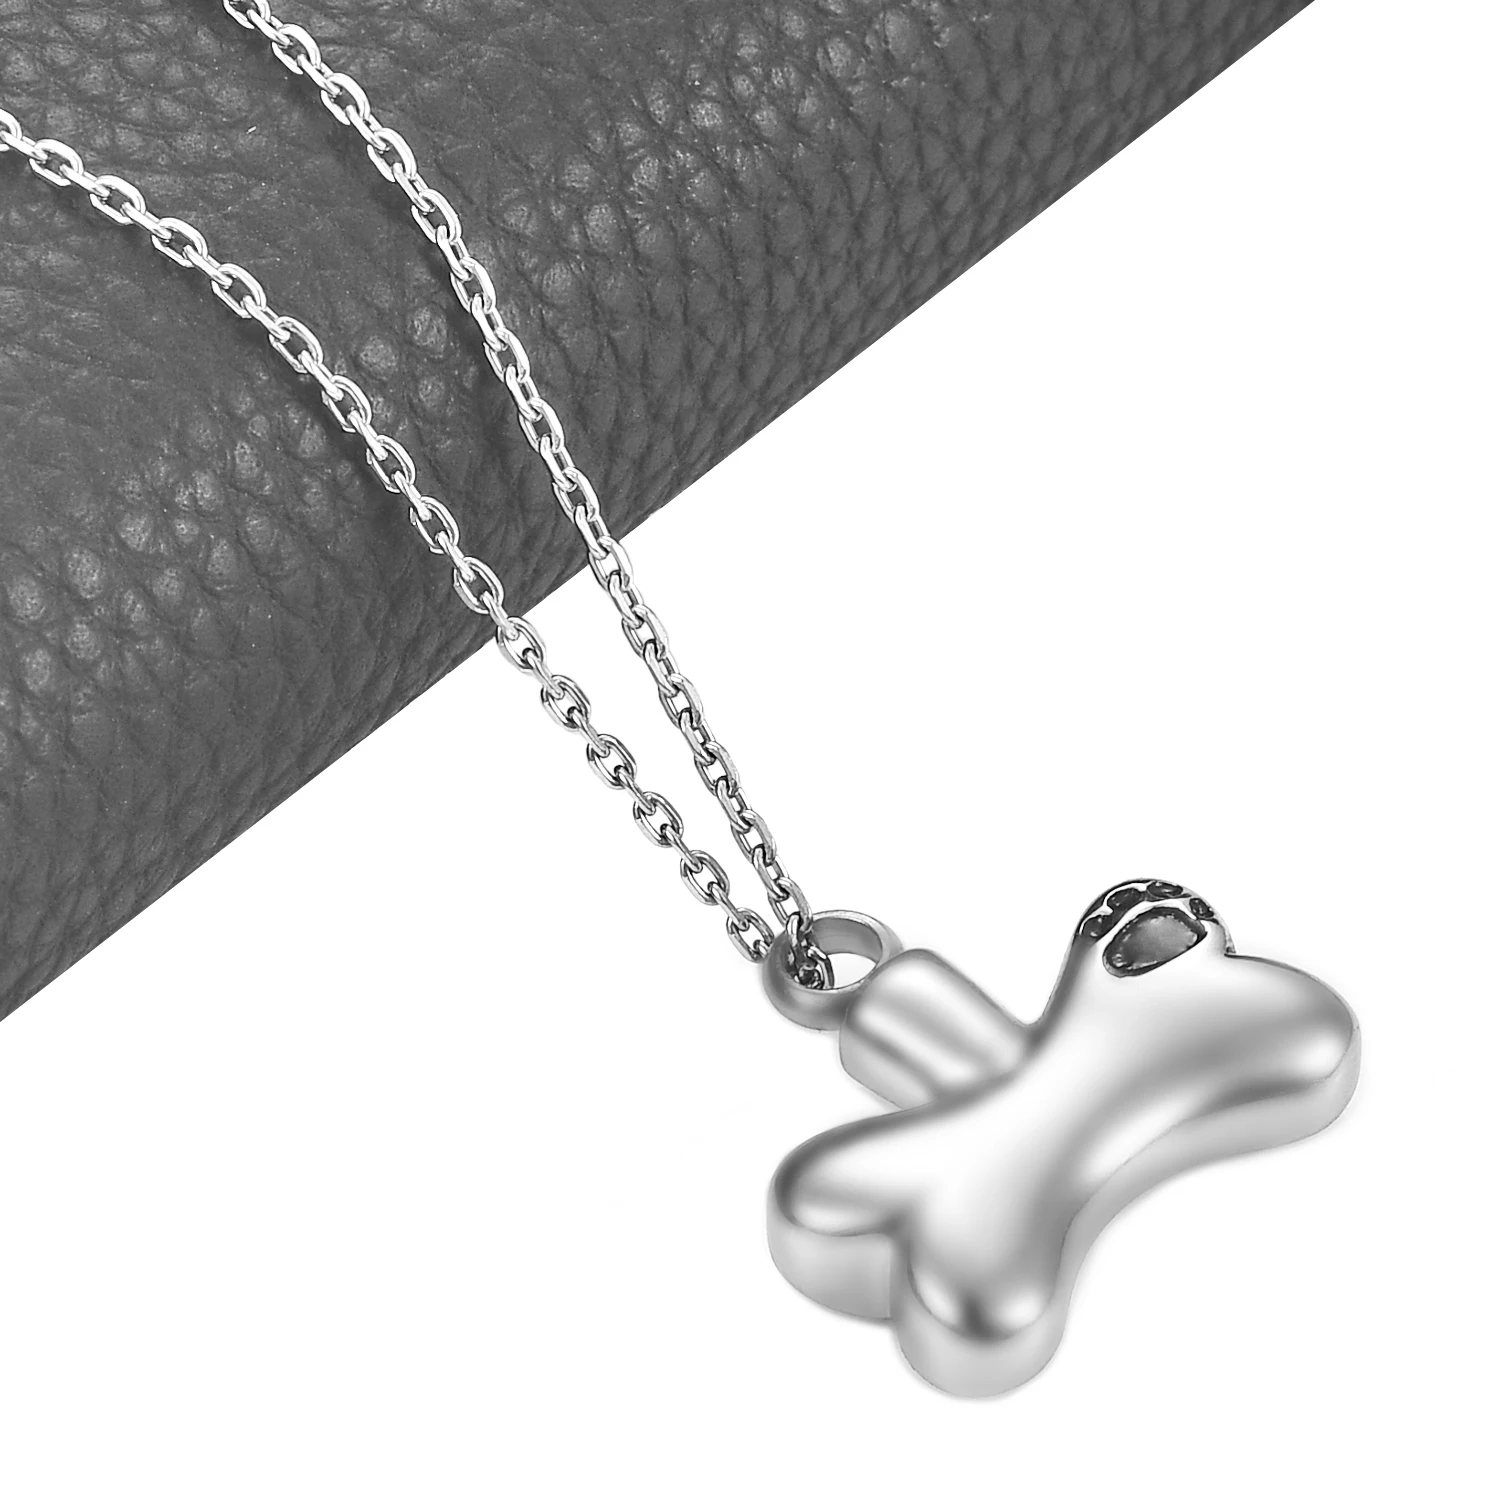 High Quality Stainless Steel Bone Print Dog Paw Pendant Pet Small Urn Cremation Ashes Souvenir Jewelry